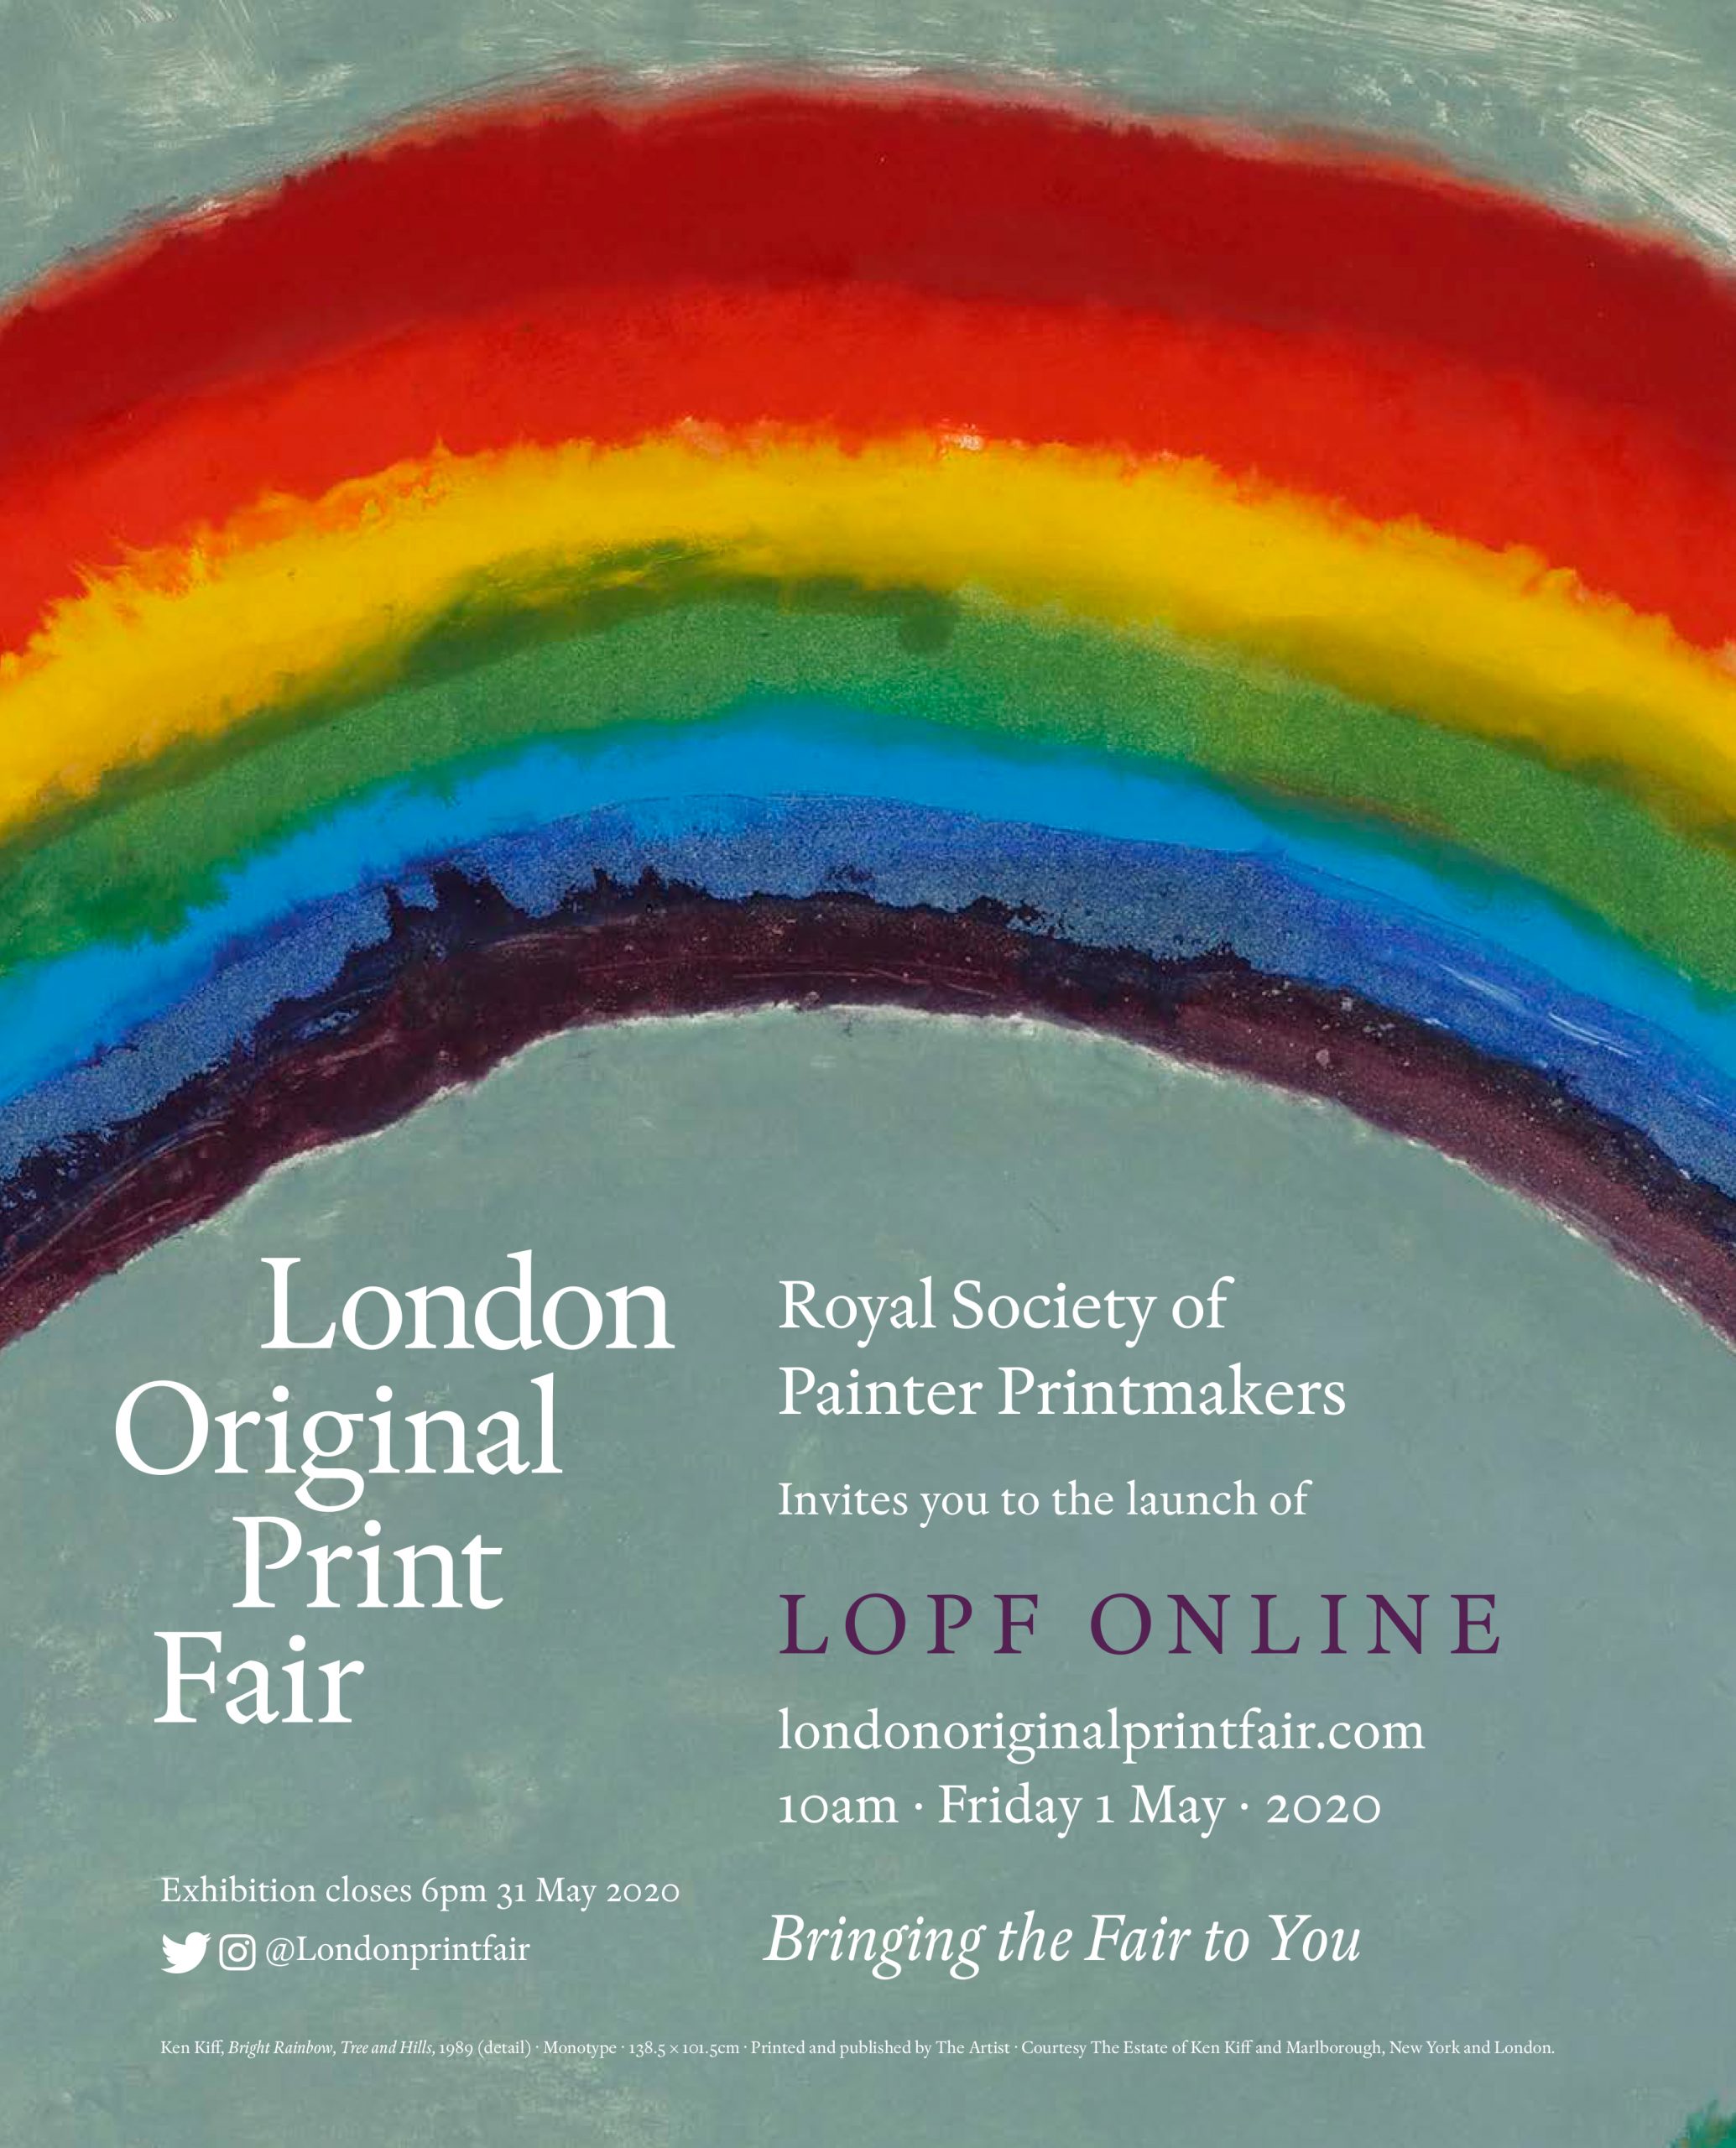 Royal Society of Painter-Printmakers invitation to view their online stand at the London Original Print Fair 2020 at Royal Academy